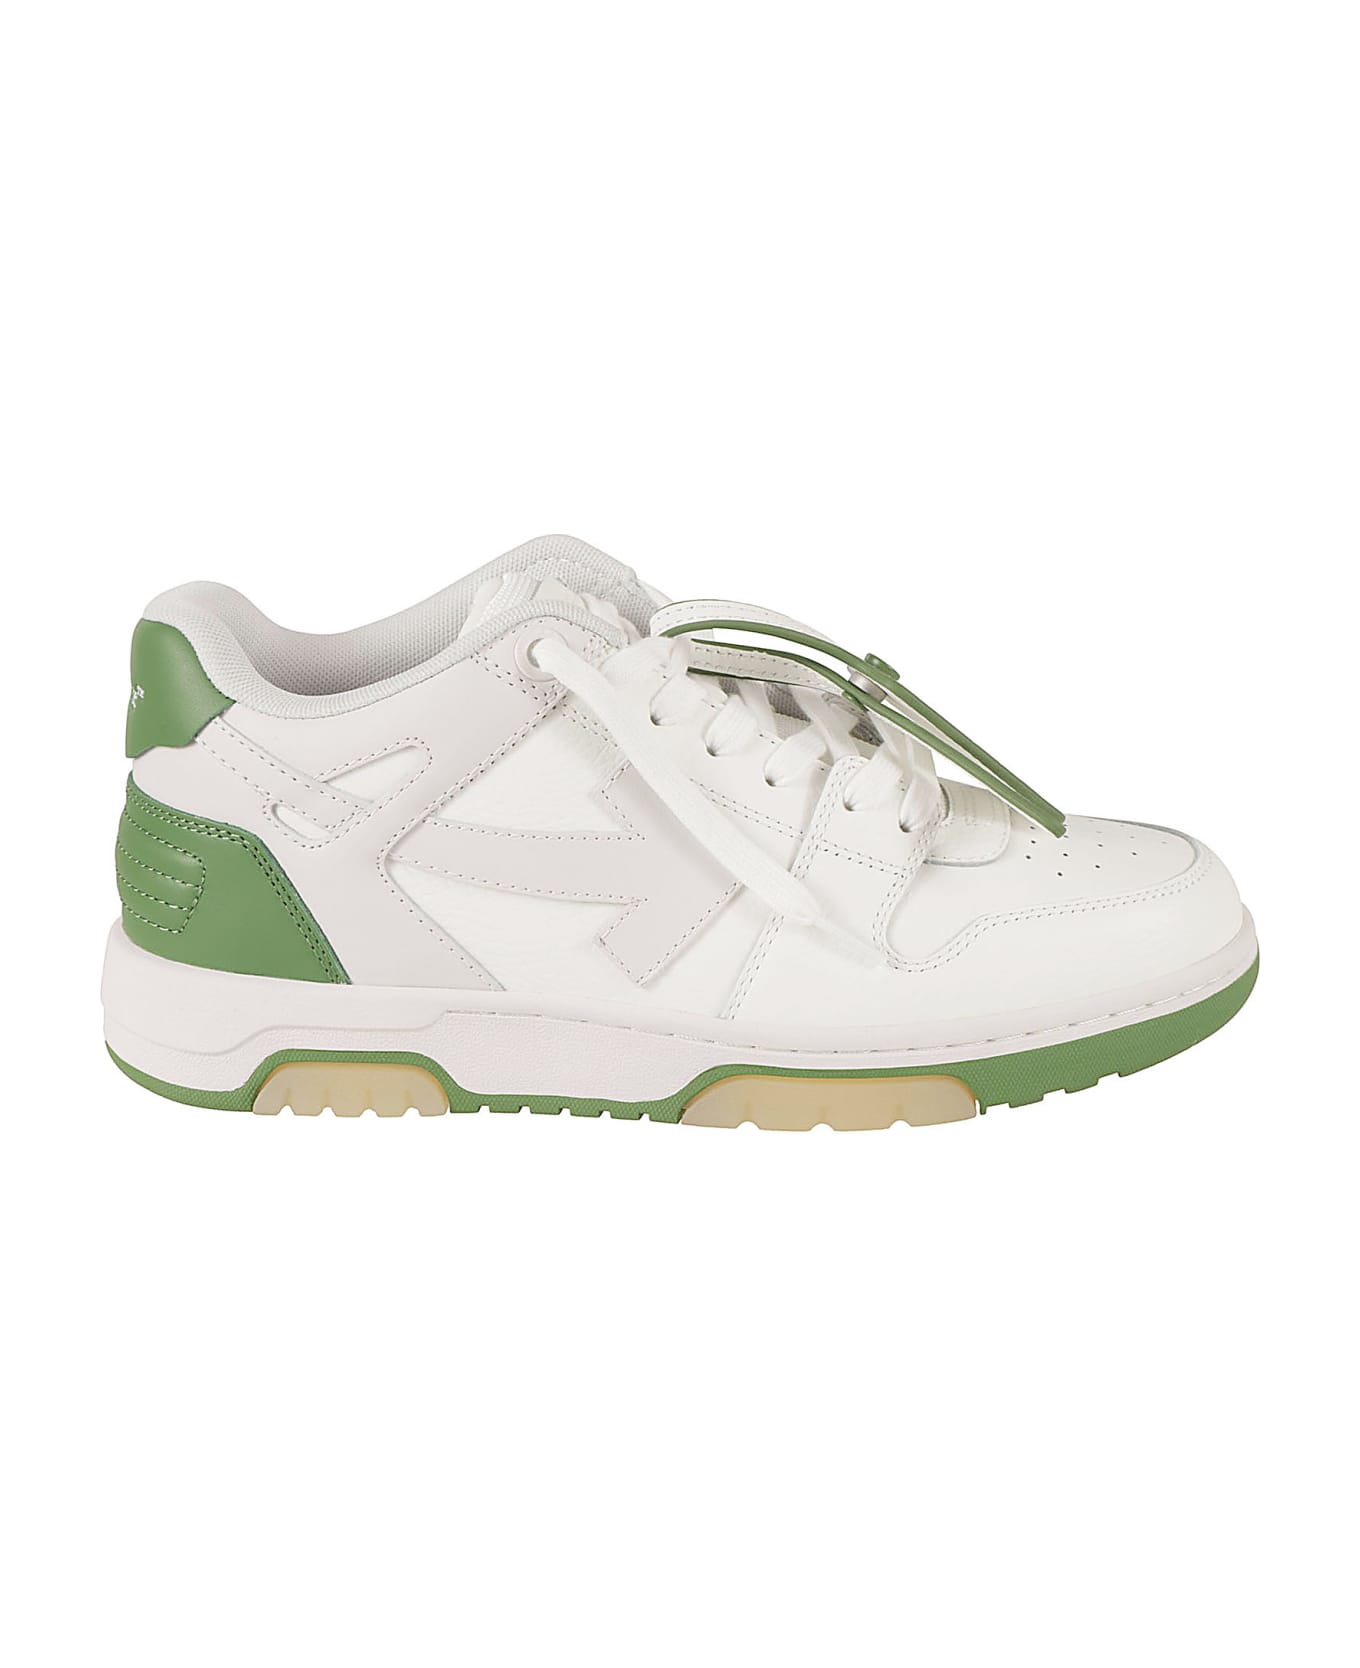 Off-White Out Of Office Sneakers - White/Forest Green